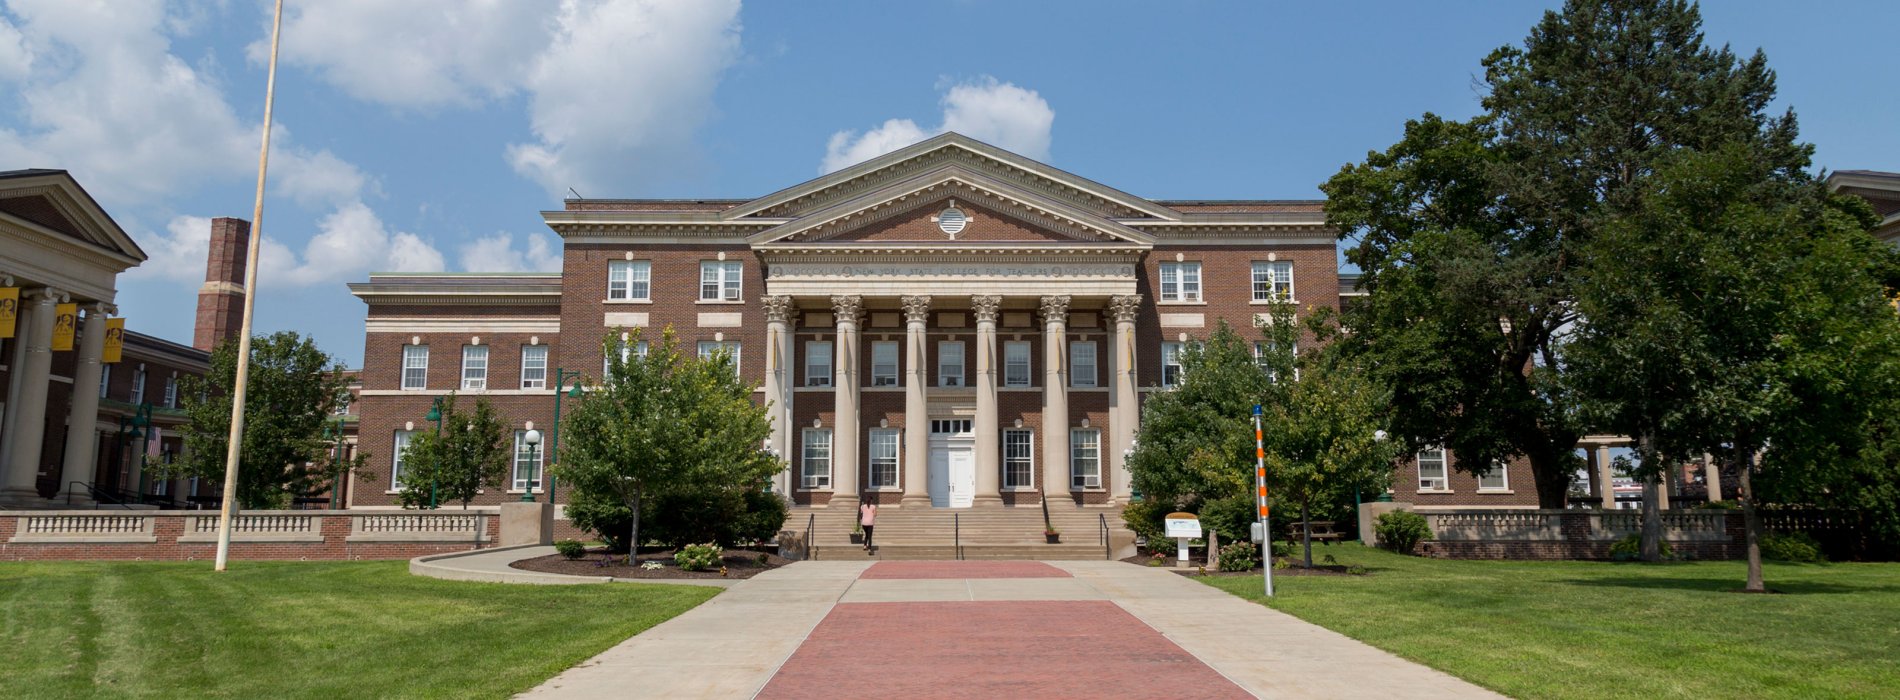 A brick Downtown Campus building with six tall columns and a brick walkway on a sunny day.